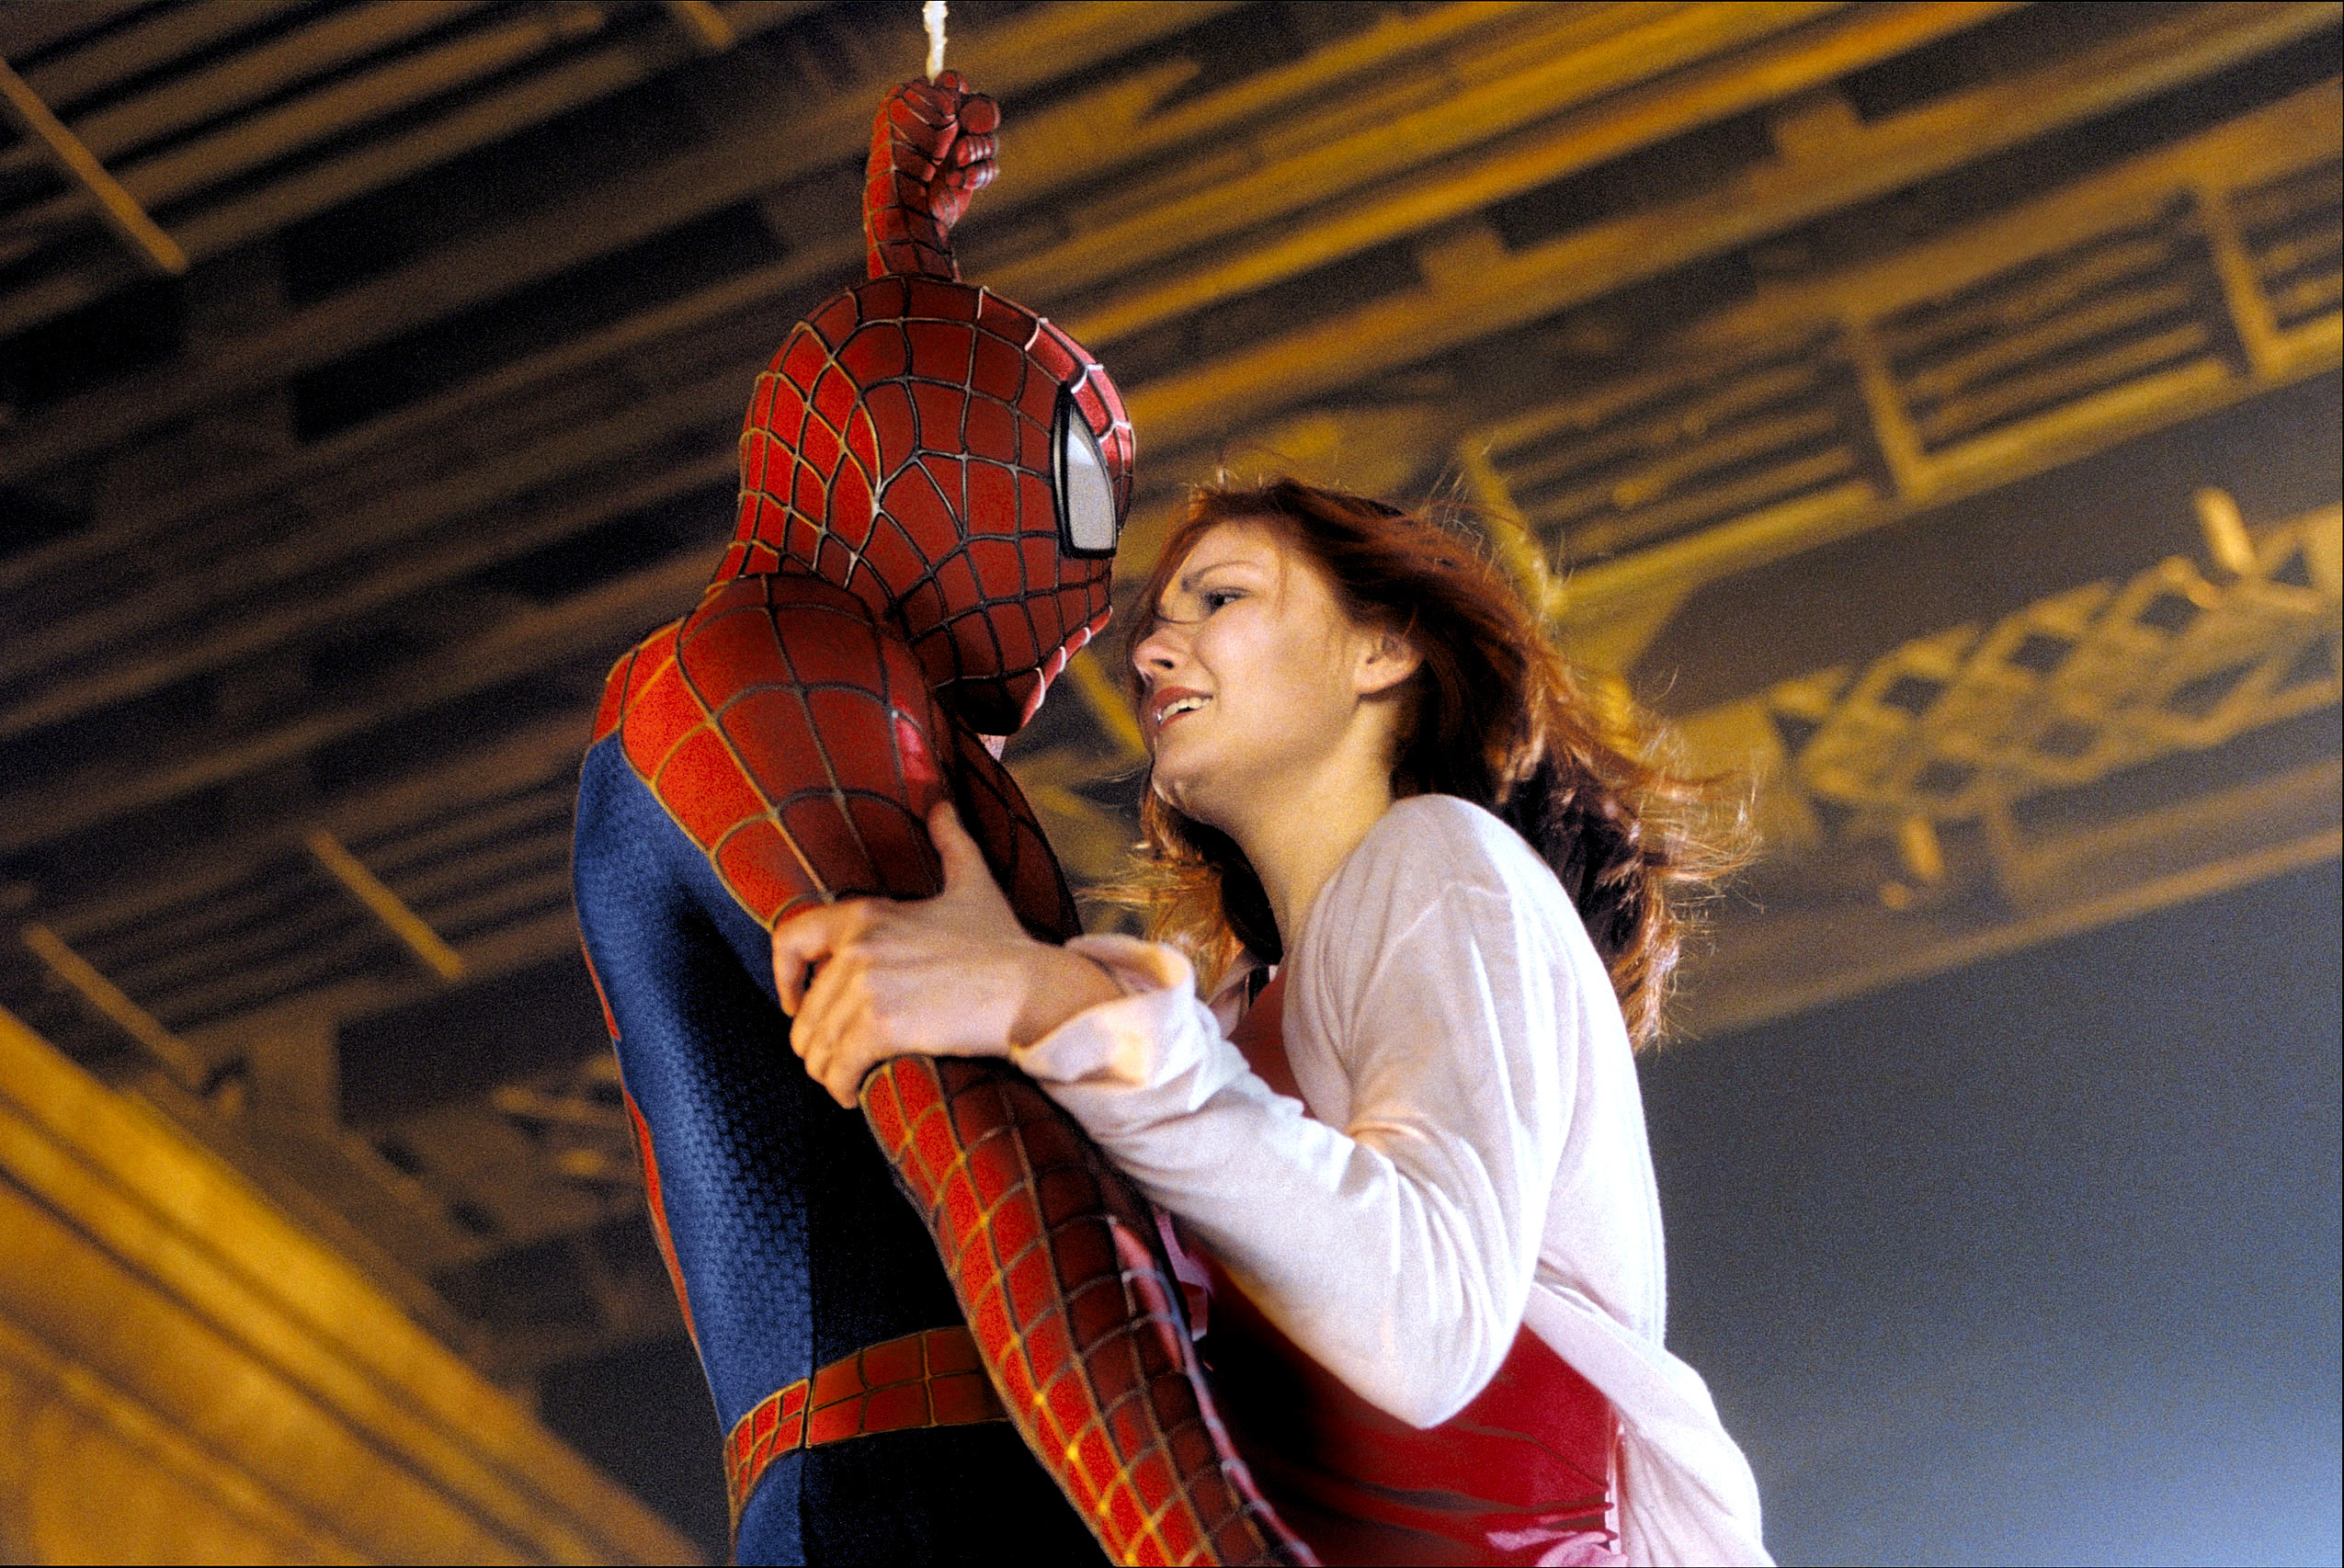 she clings to spider-man as they hang from a building